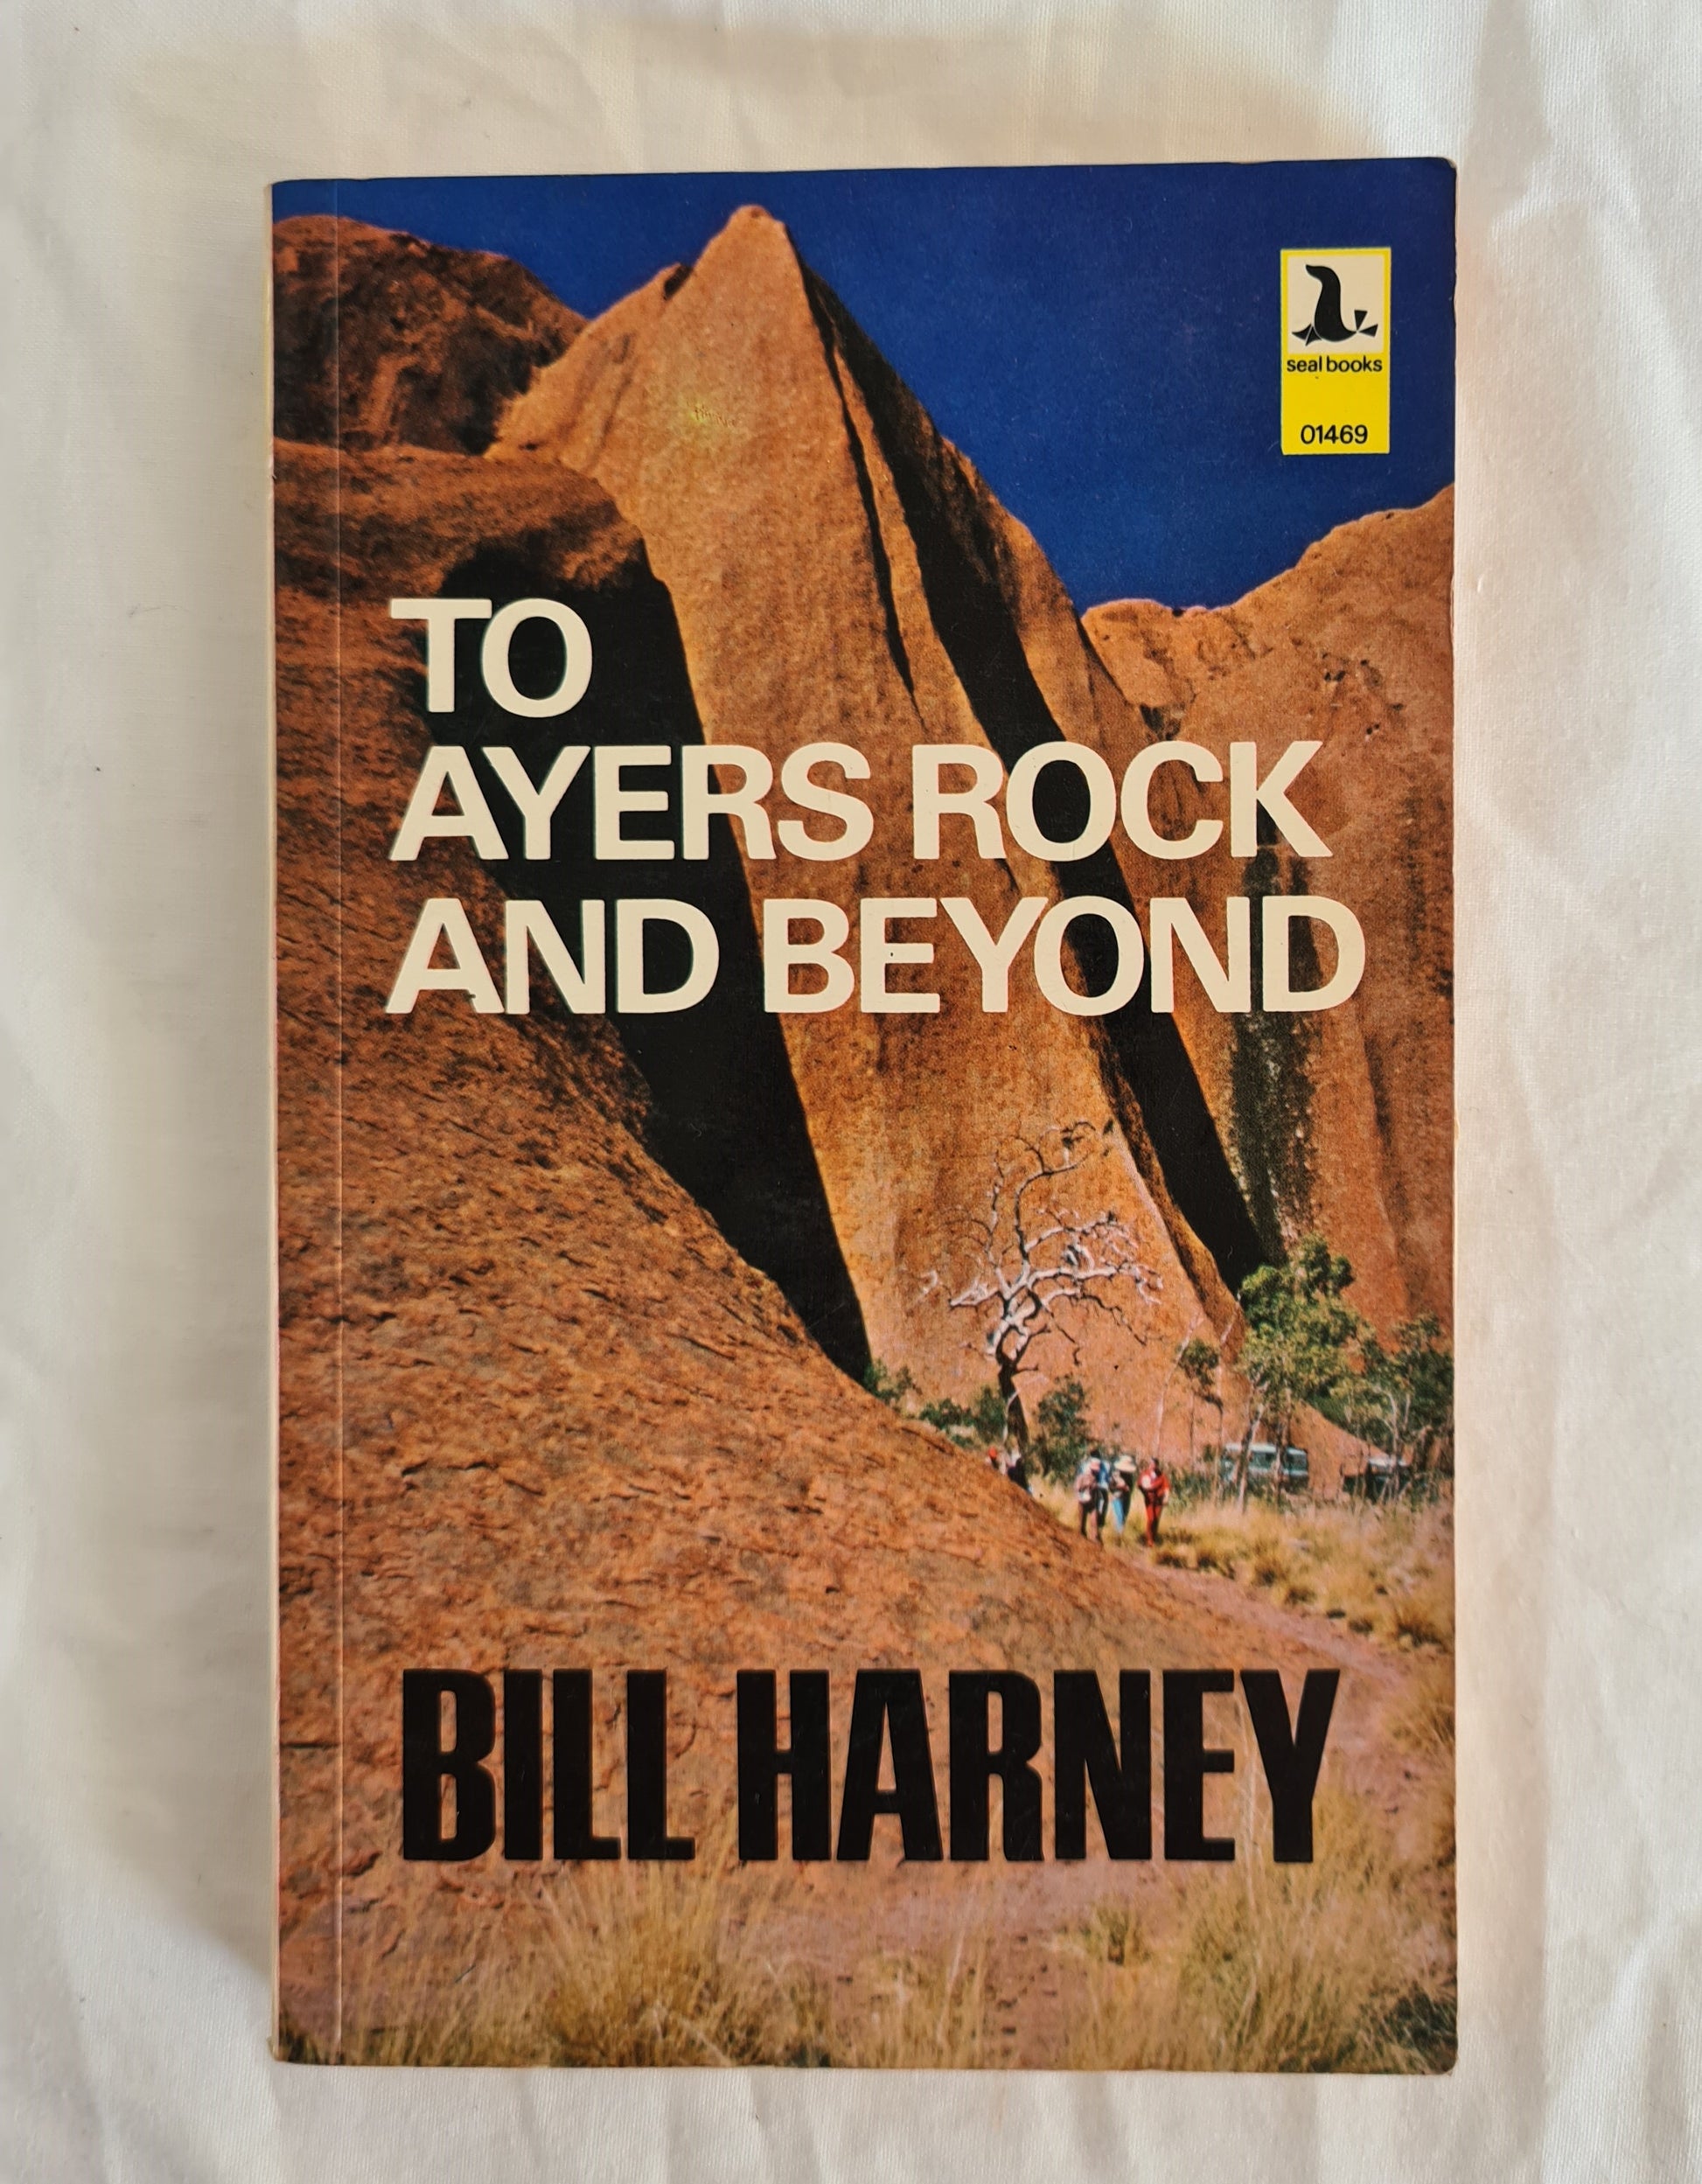 To Ayers Rock and Beyond  by W. E. (Bill) Harney